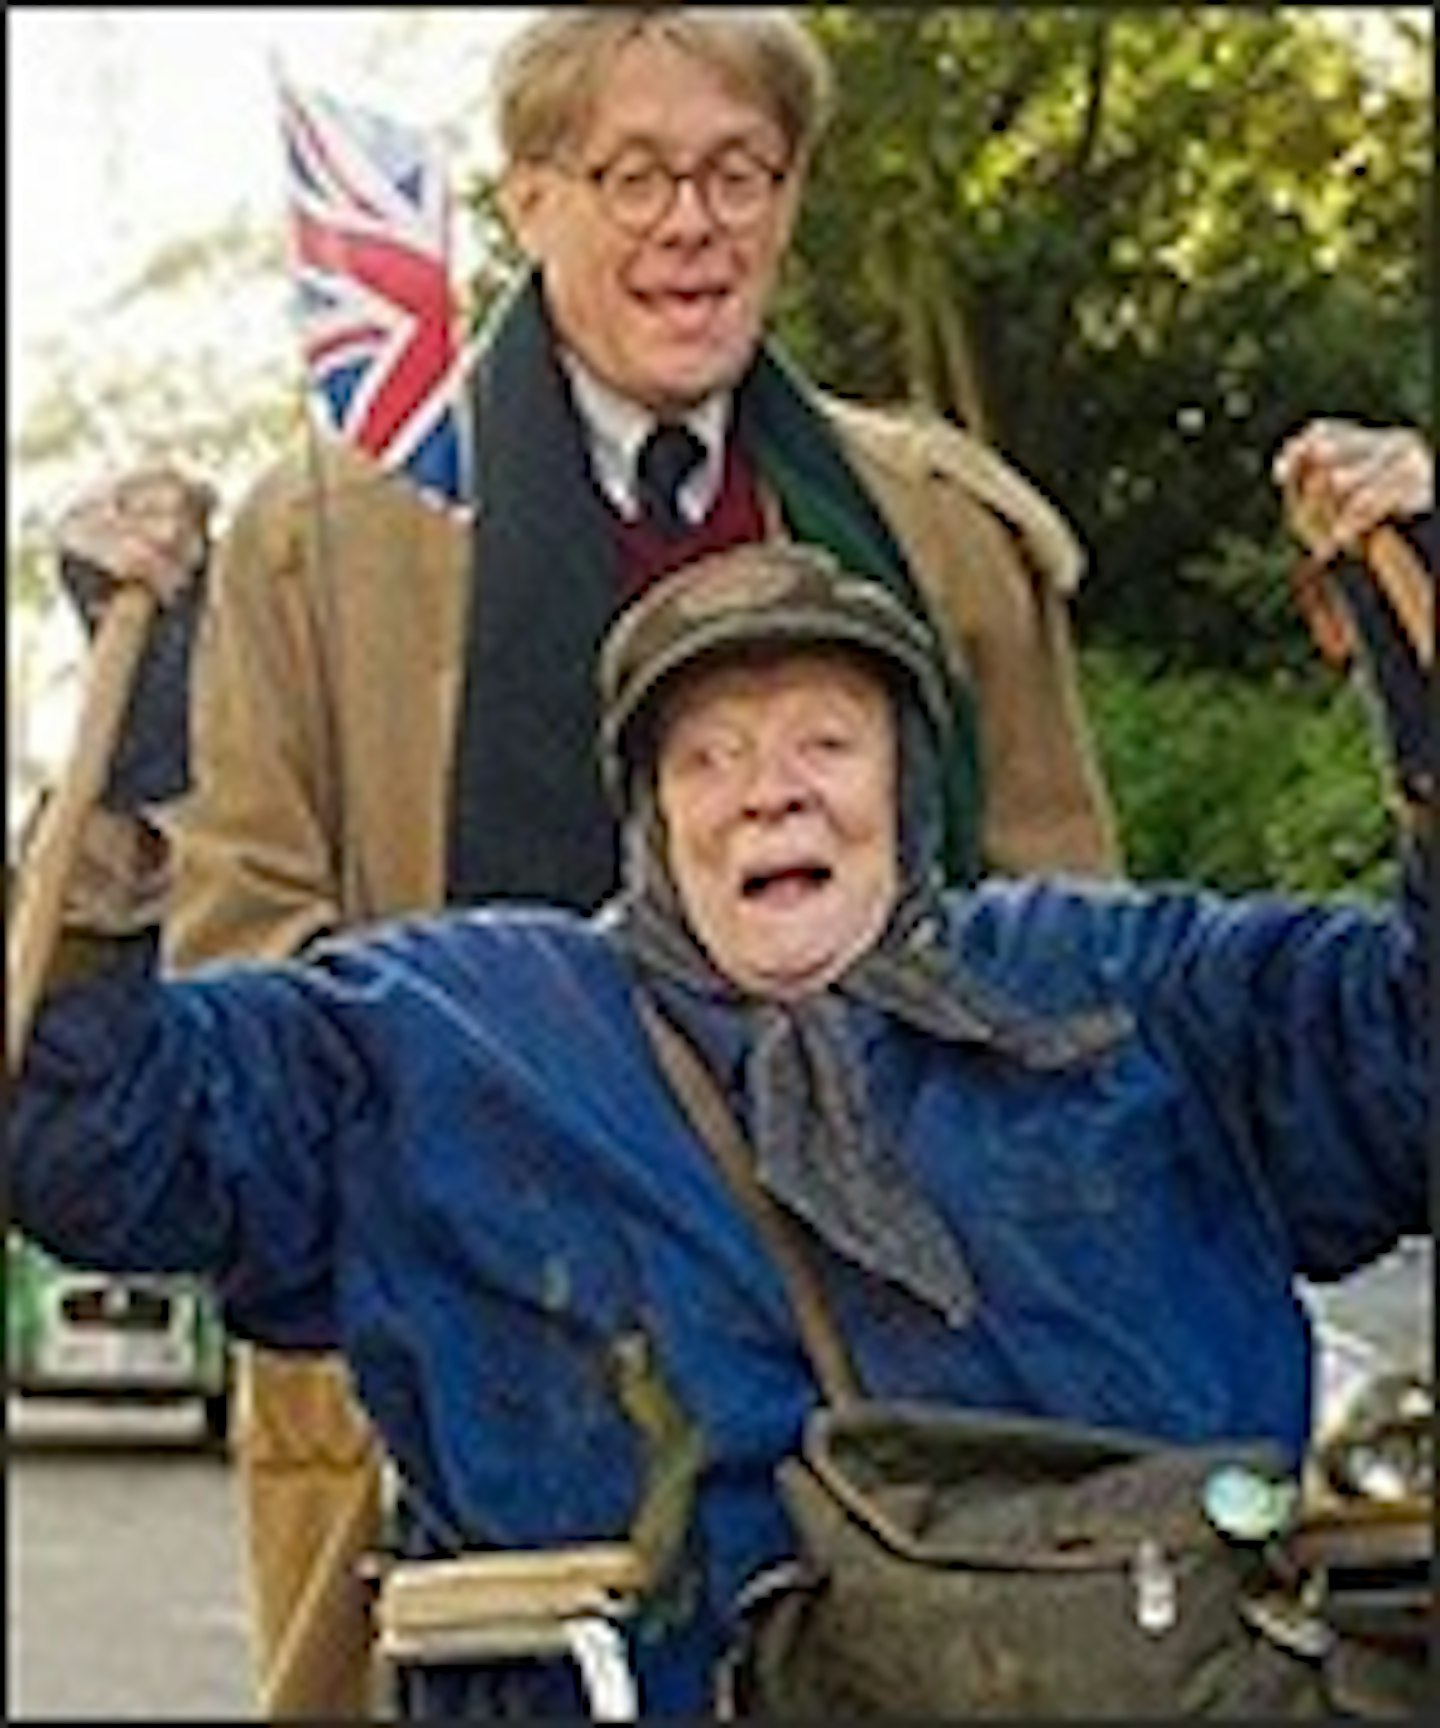 New Featurette For Maggie Smith's The Lady In The Van